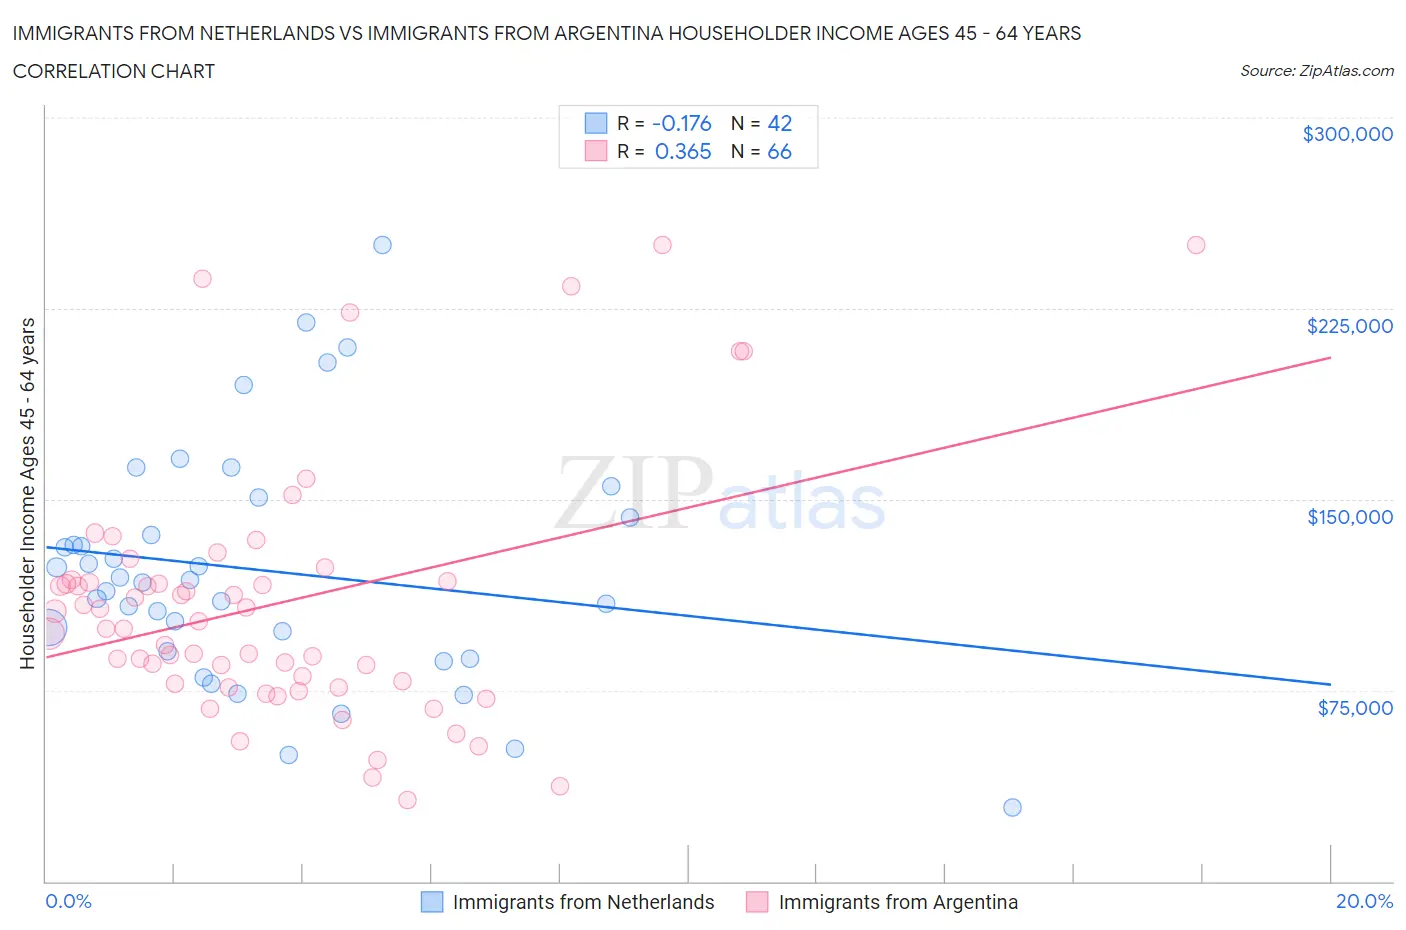 Immigrants from Netherlands vs Immigrants from Argentina Householder Income Ages 45 - 64 years